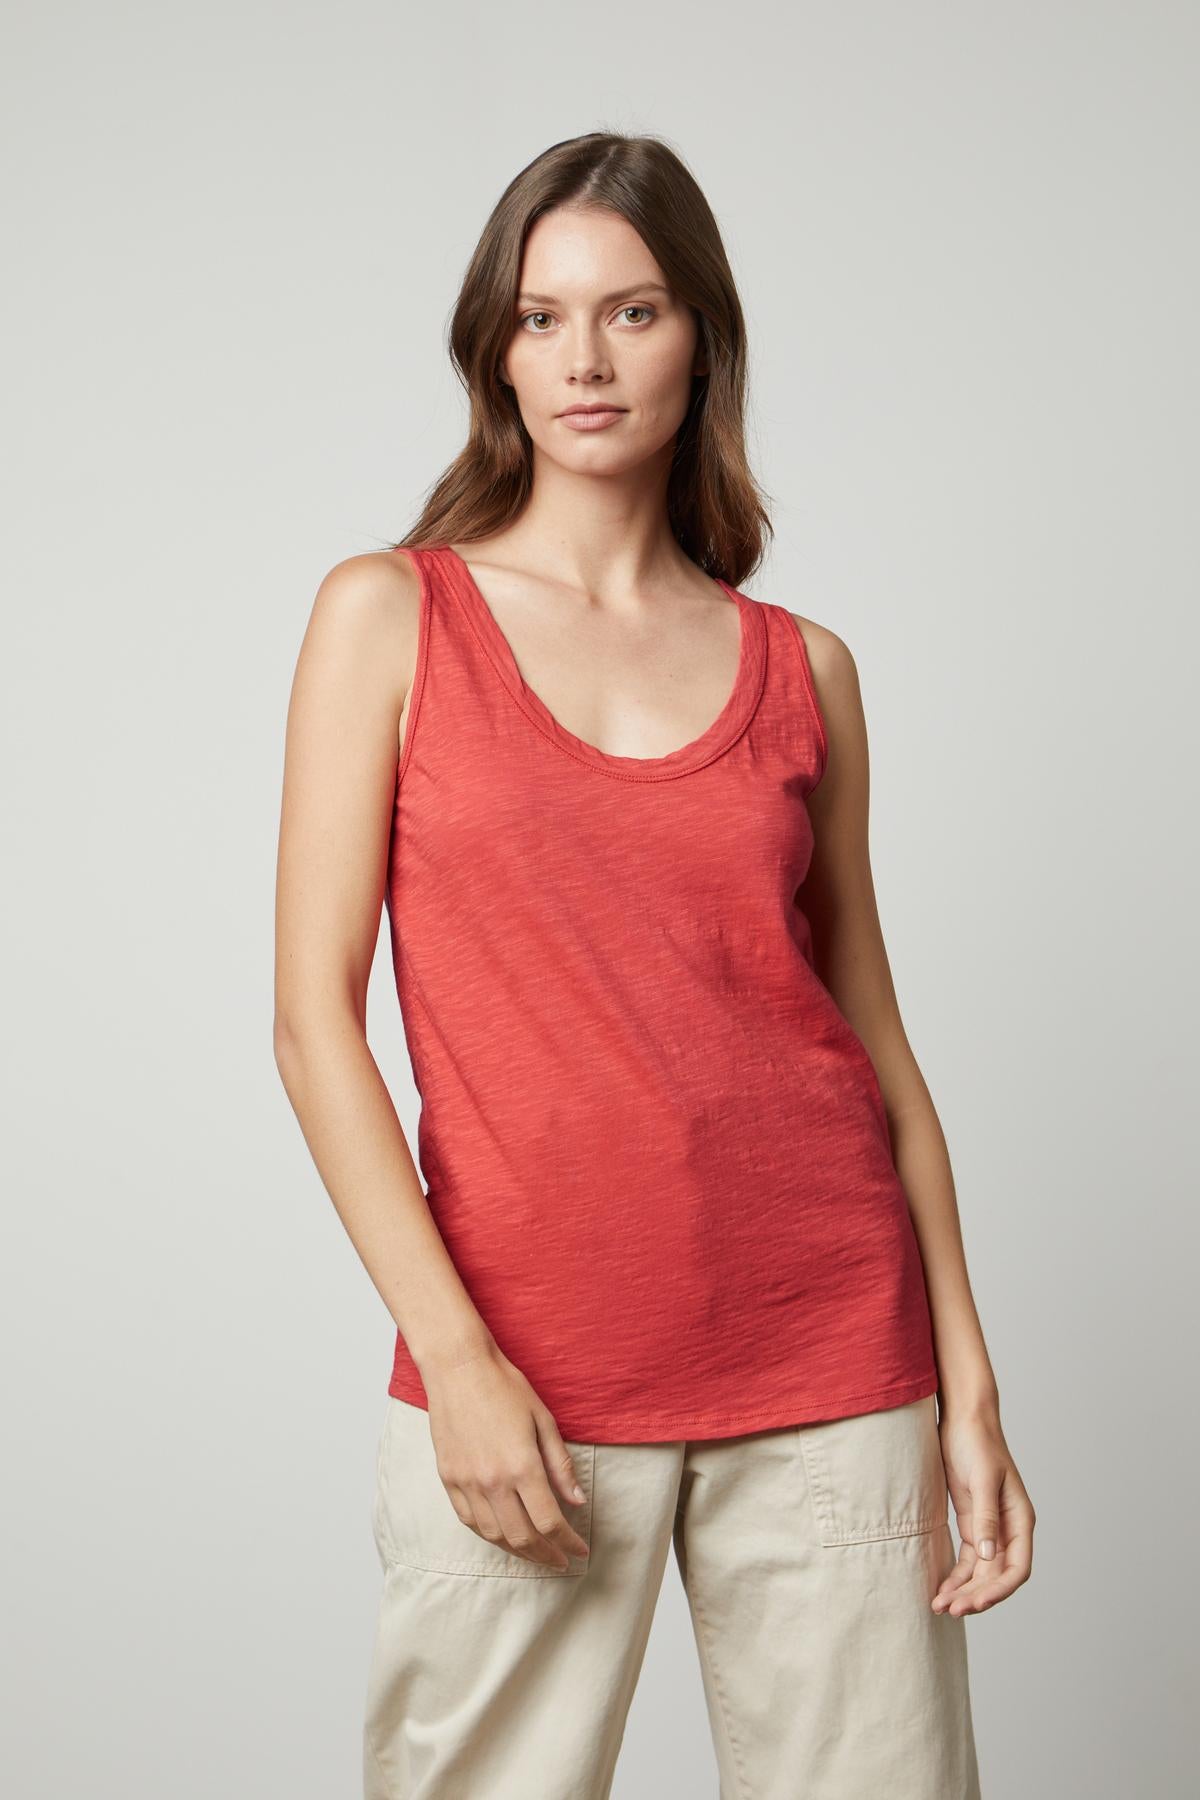   A woman wearing a Velvet by Graham & Spencer JOY ORIGINAL SLUB SCOOP NECK TANK in soft cotton, with flattering arm holes and khaki pants. 